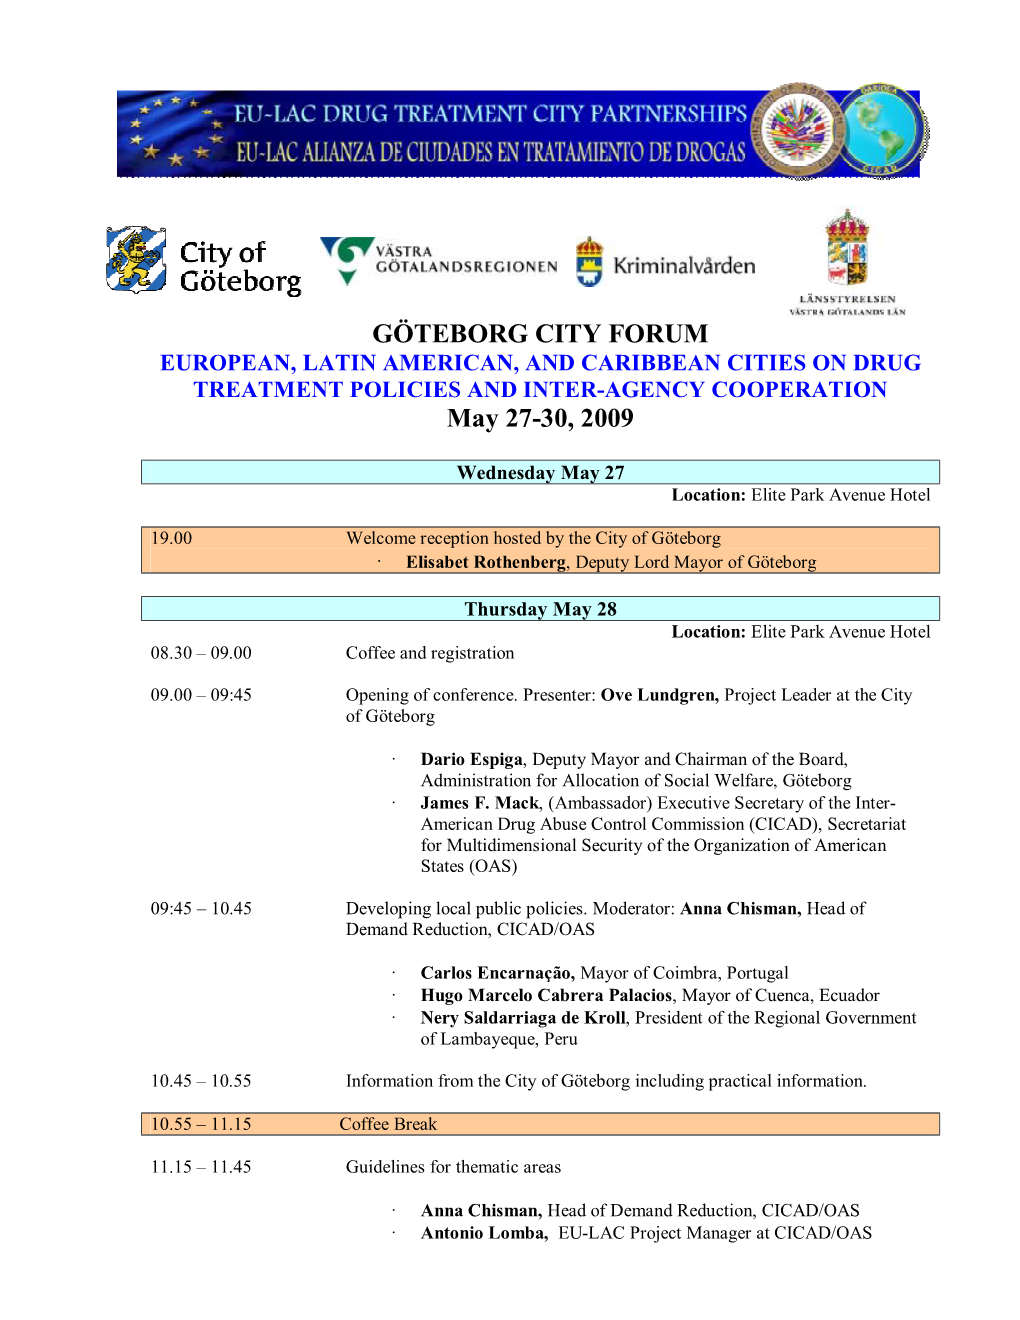 Agenda Goteborg EULAC Updated May 22 2009 ENG FINAL